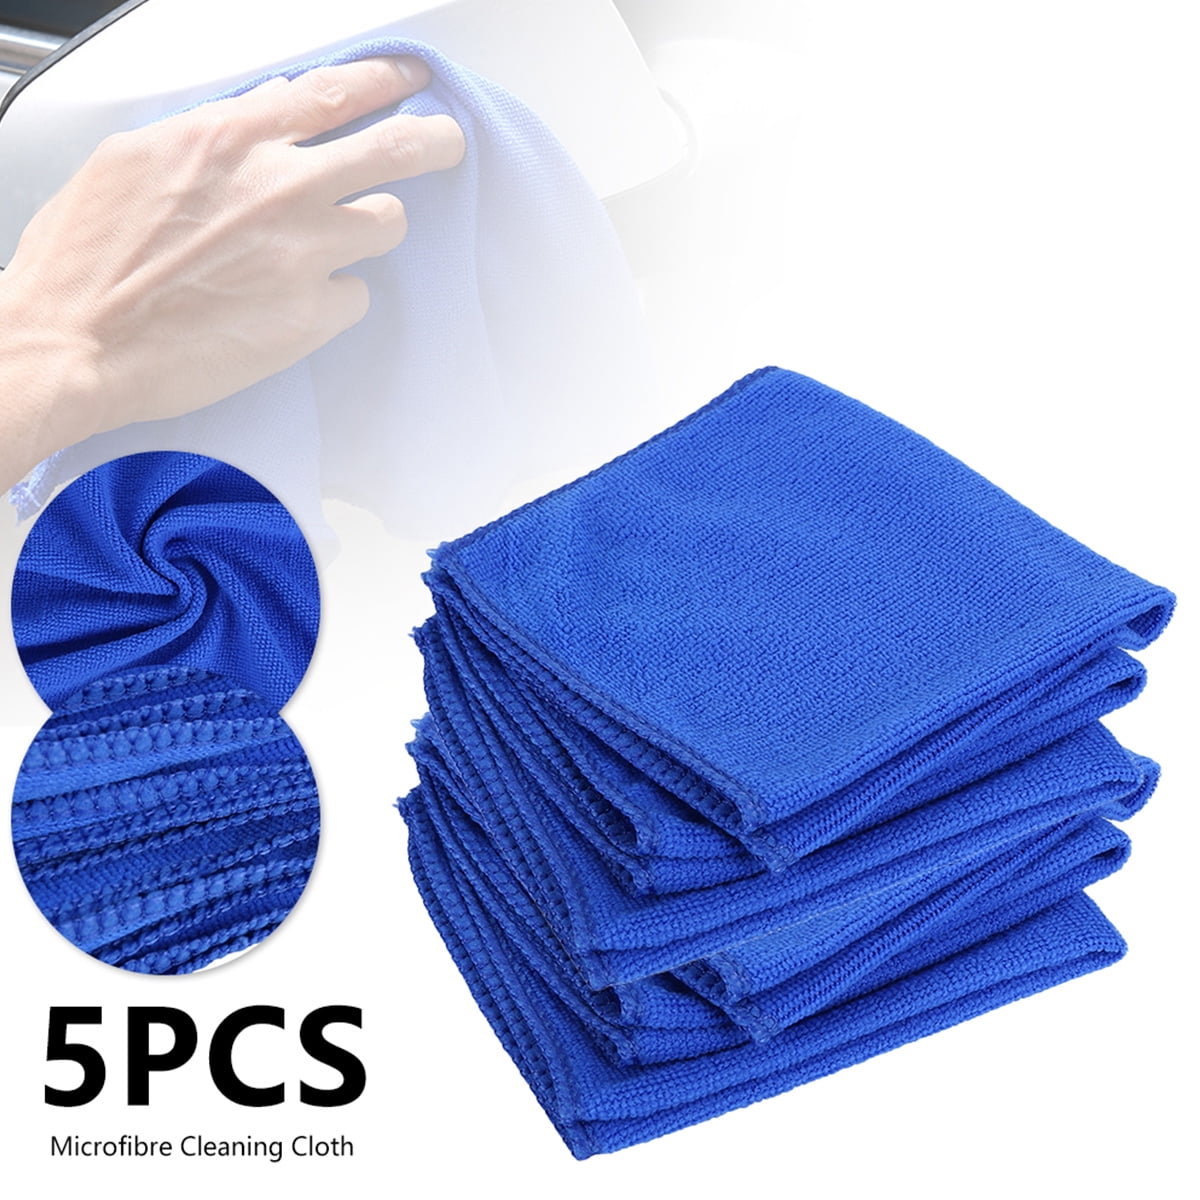 5pcs, Microfiber Cleaning Cloth, Cleaning Towels For Housekeeping, Reusable  And Lint Free Cloth Towels, Home Kitchen Supplies, Random Color